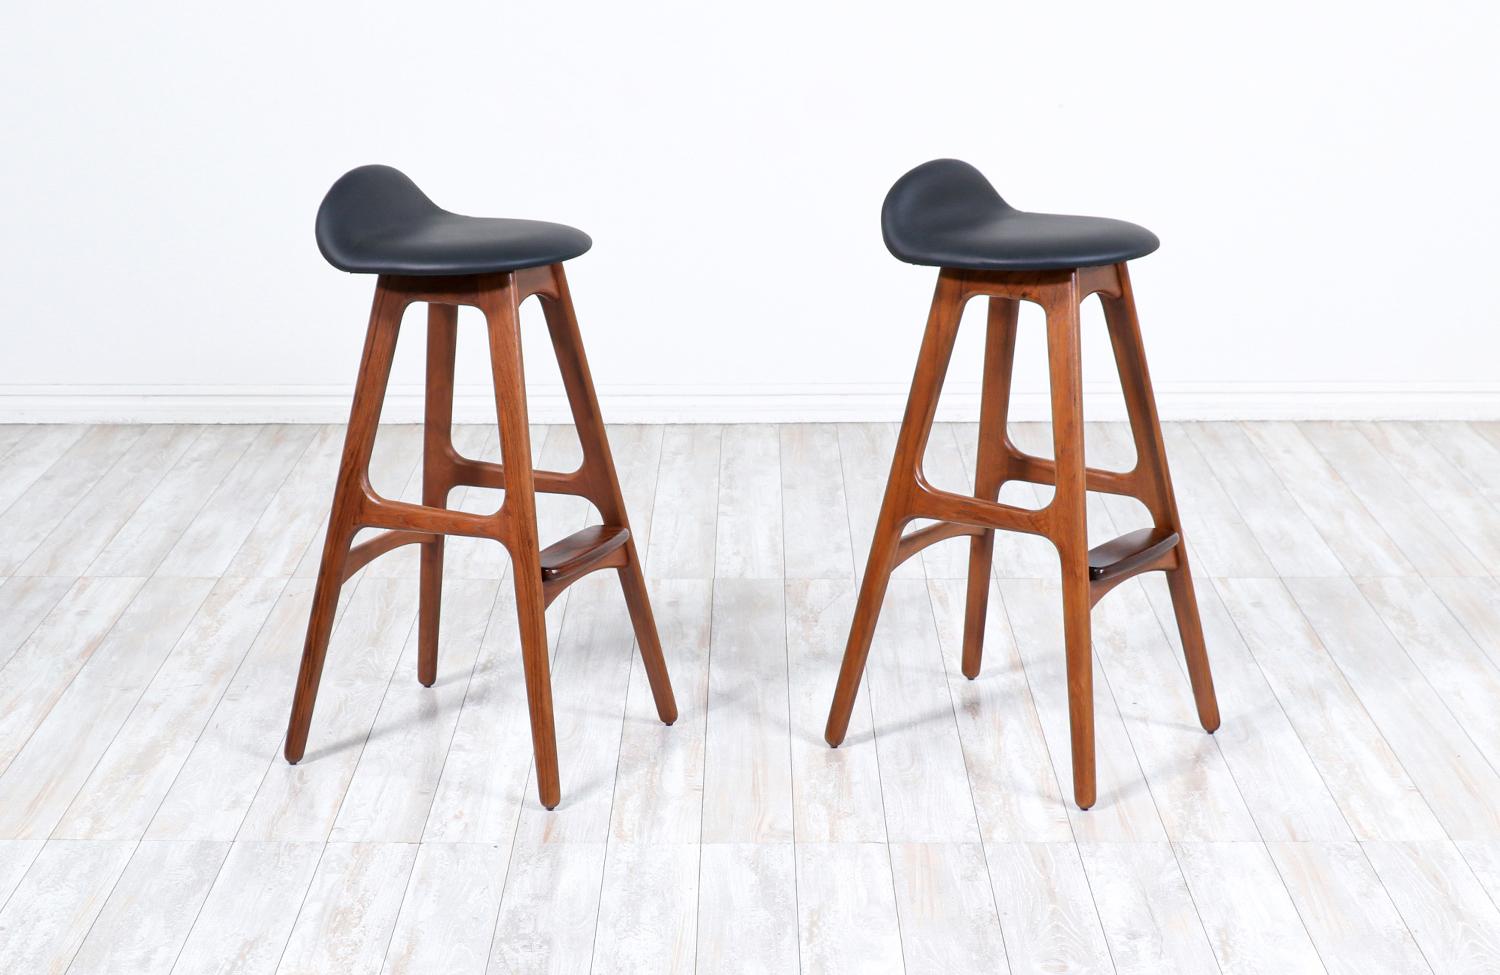 Pair of classic Danish stools, Model-61 designed by Erik Buch for Oddense Maskinsnedkeri and manufactured in Denmark circa 1950s. These exceptionally crafted stools feature a minimalist streamline with a solid teak wood frame and a gorgeously